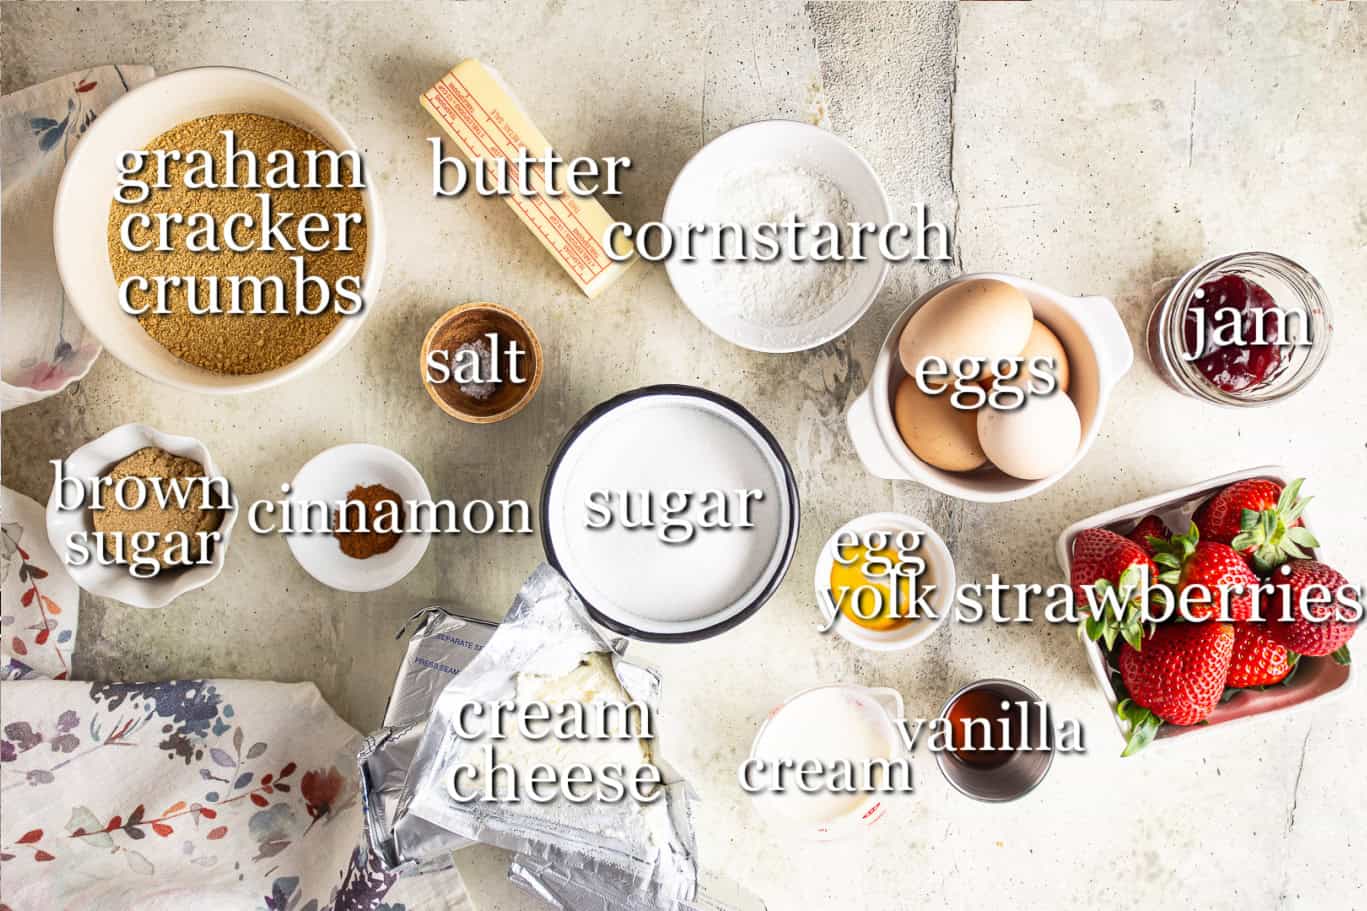 Ingredients for making strawberry cheesecake, with text labels.